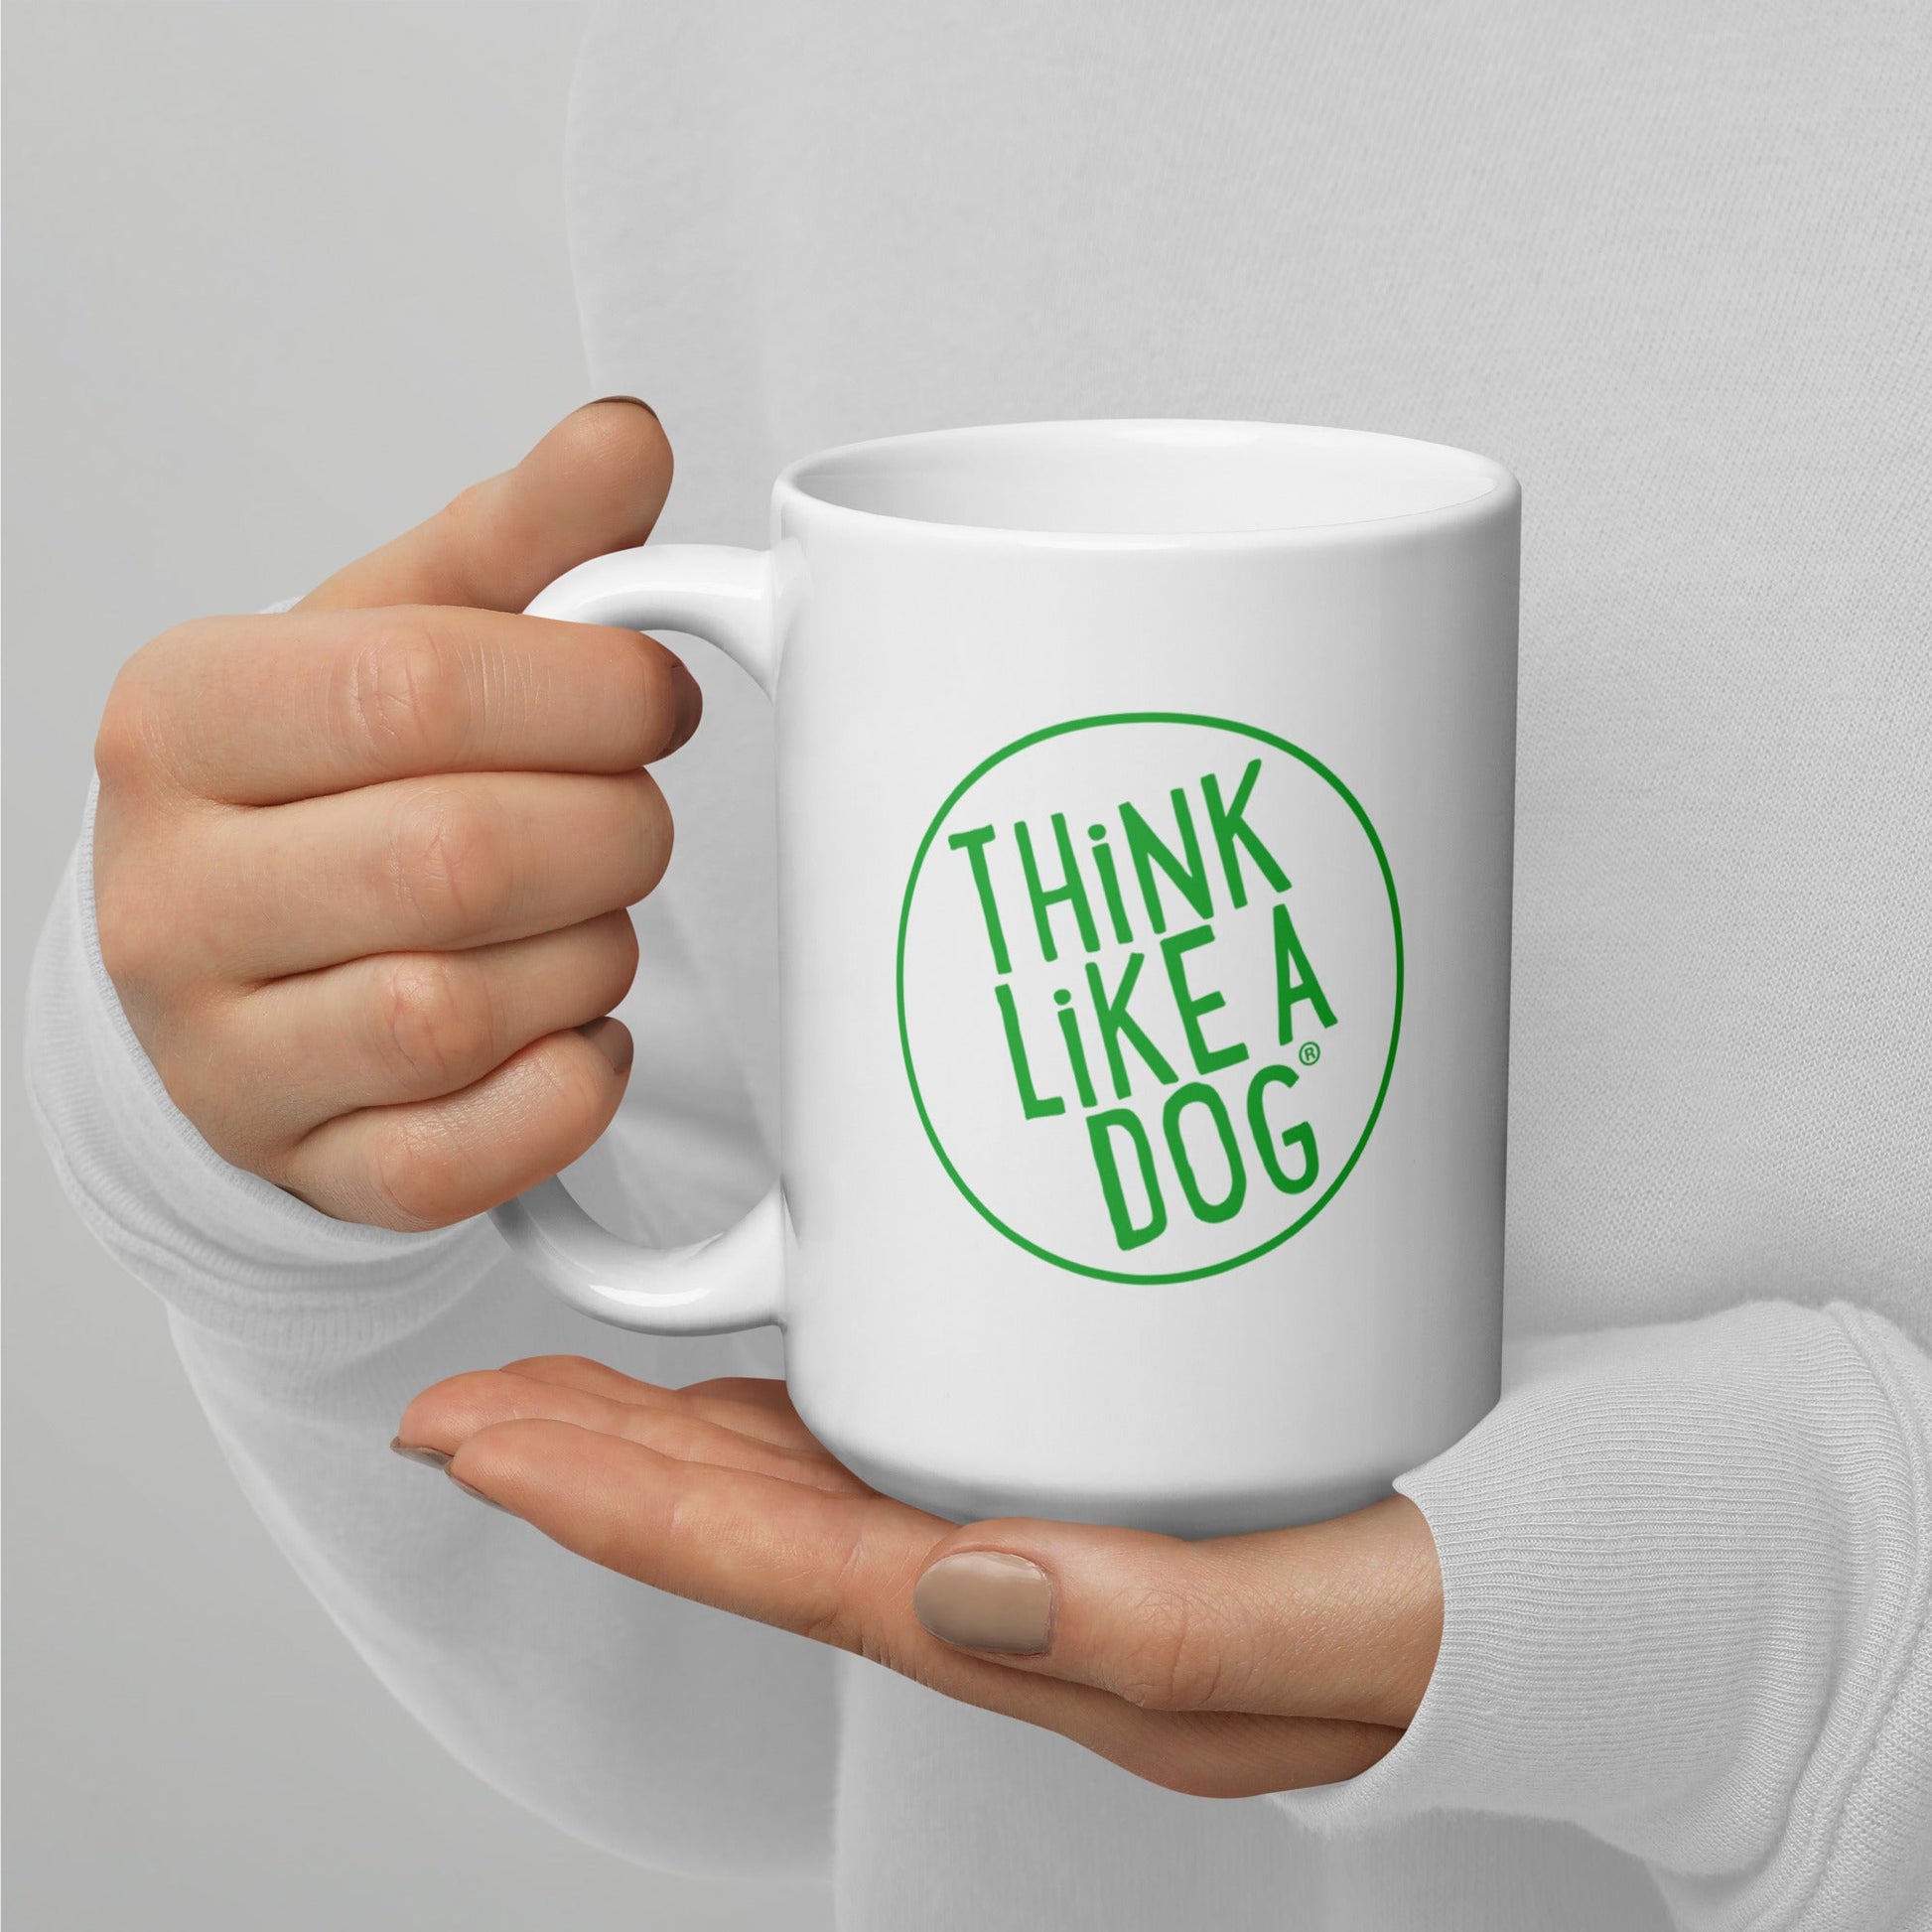 A person holding a white mug with their right hand. The mug has a text design that reads 'THINK LIKE A DOG' in bold, green letters inside a green circle outline.